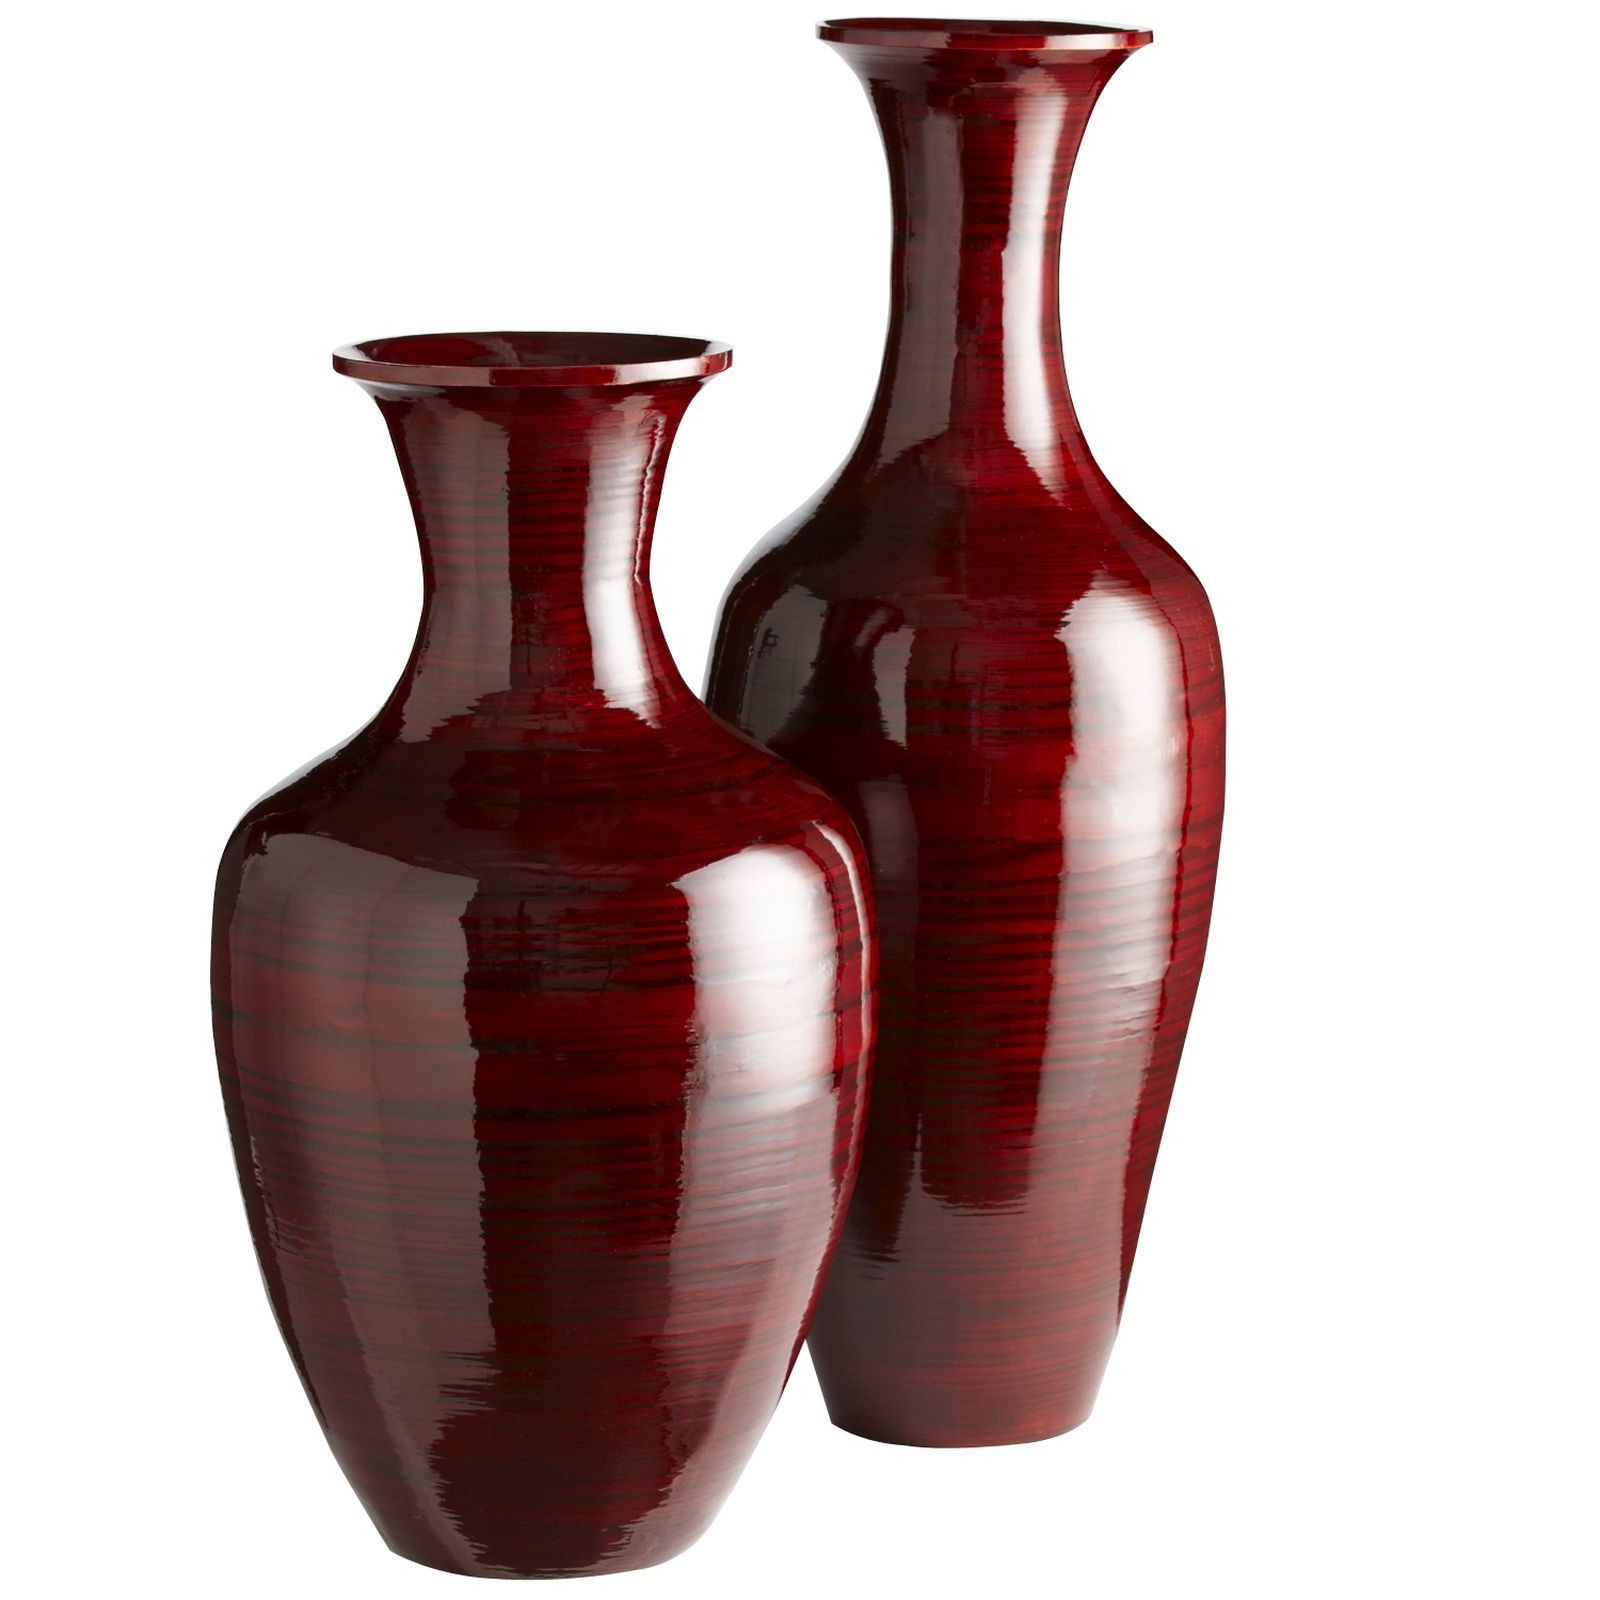 20 Famous Bamboo Vase Ideas 2024 free download bamboo vase ideas of glossy red bamboo urns vases decor pinterest urn and foyers inside glossy red bamboo urns vases